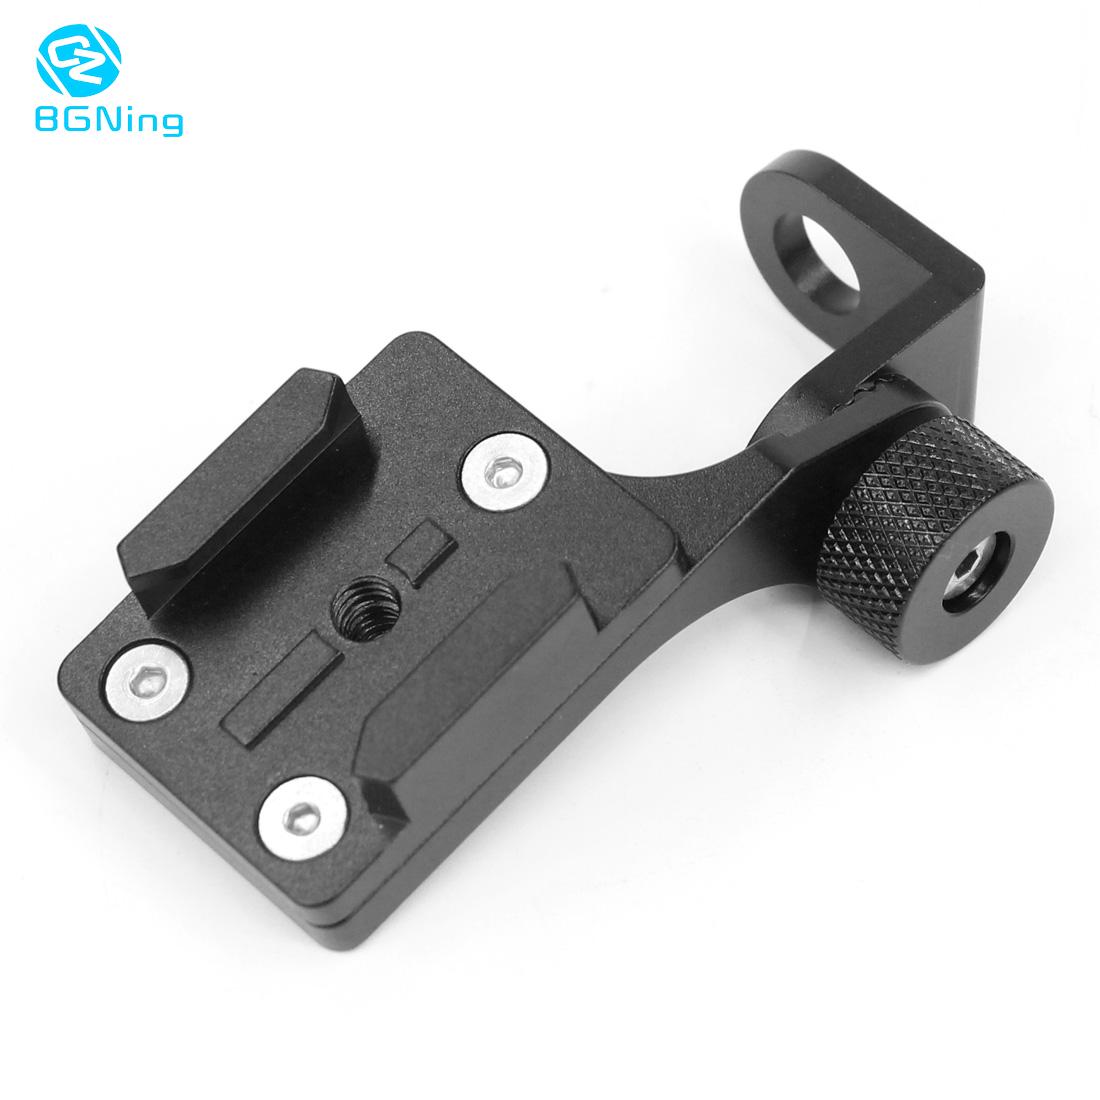 BGNing Motorcycle Accessories Rearview Mirror Mount Holder Clamp Bar Camera Holder for GoPro Max Xiaoyi SJCAM Action Camera